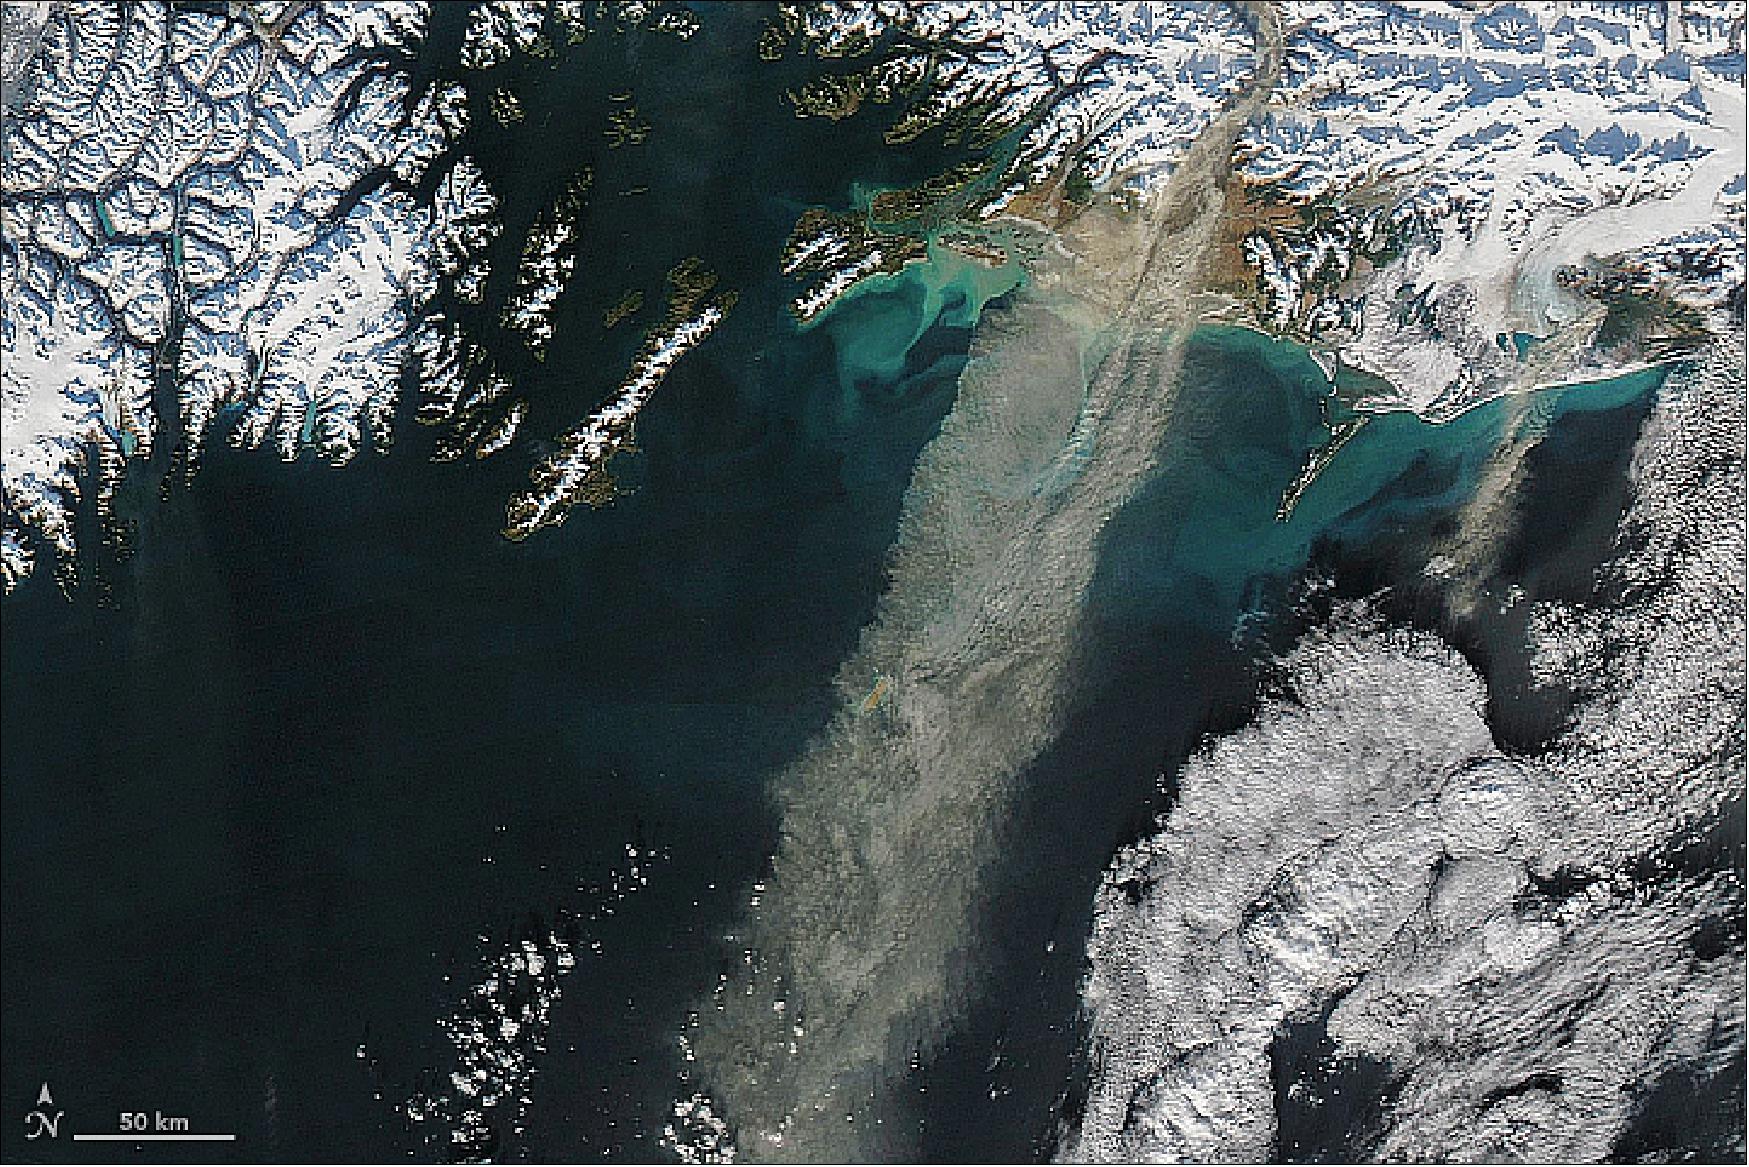 Figure 90: The MODIS instrument on the Aqua satellite captured the dust storm in the Gulf of Alaska on 11 Nov. 2017 (image credit: NASA Earth Observatory, image by Joshua Stevens, using MODIS data from LANCE/EOSDIS Rapid Response. Story by Adam Voiland)